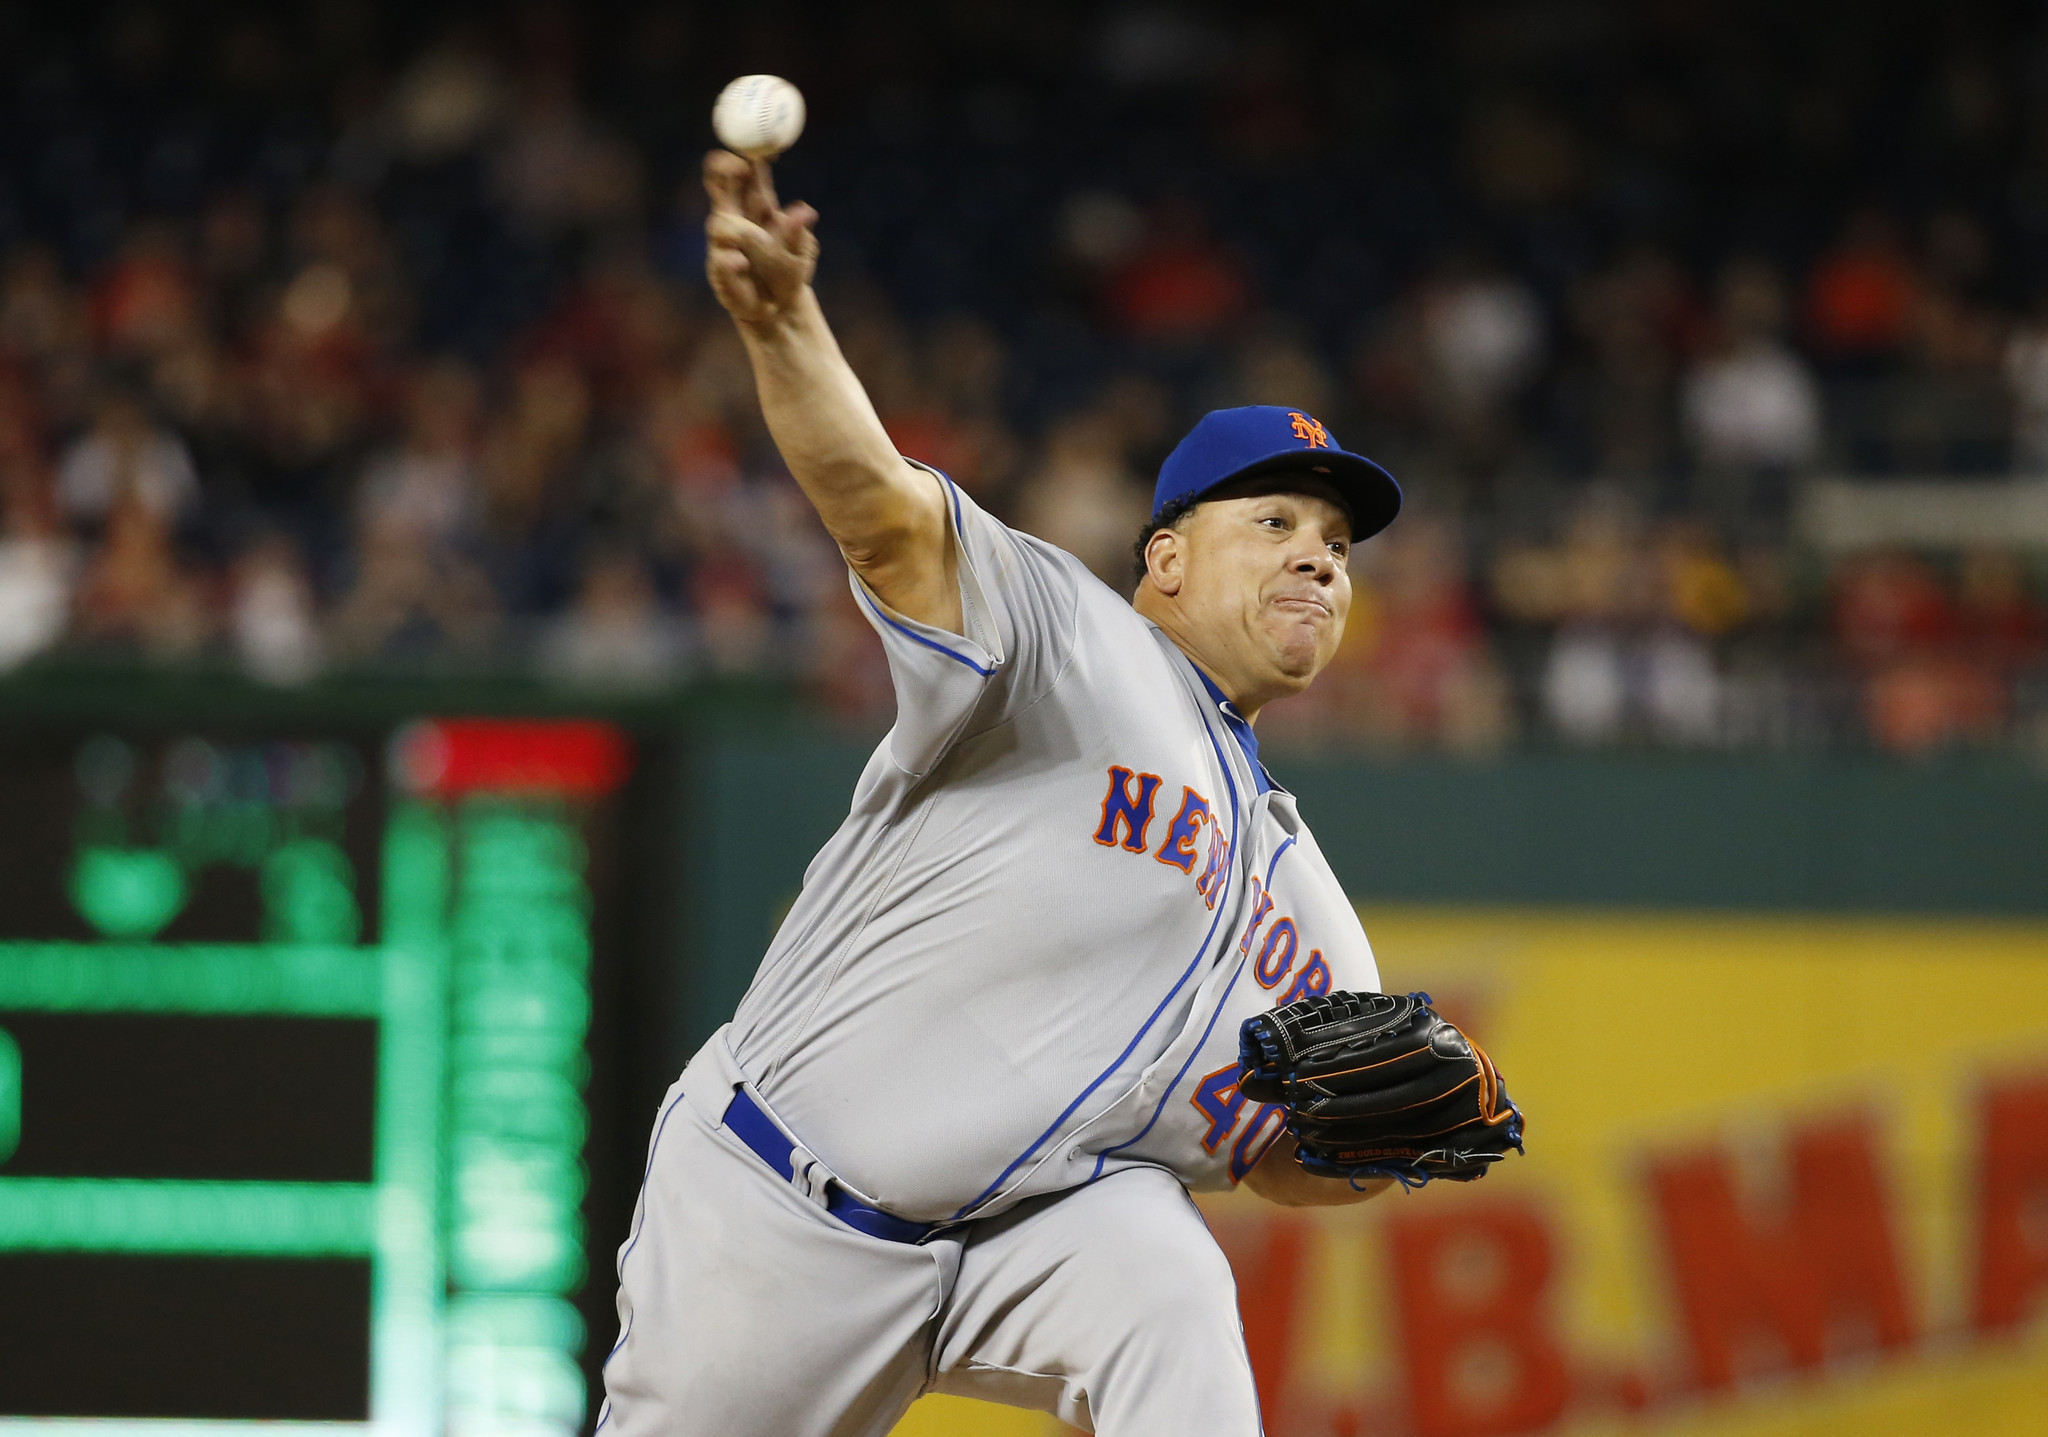 Ex Met Bartolo Colon Doesnt Want To Retire Until He Passes One Last